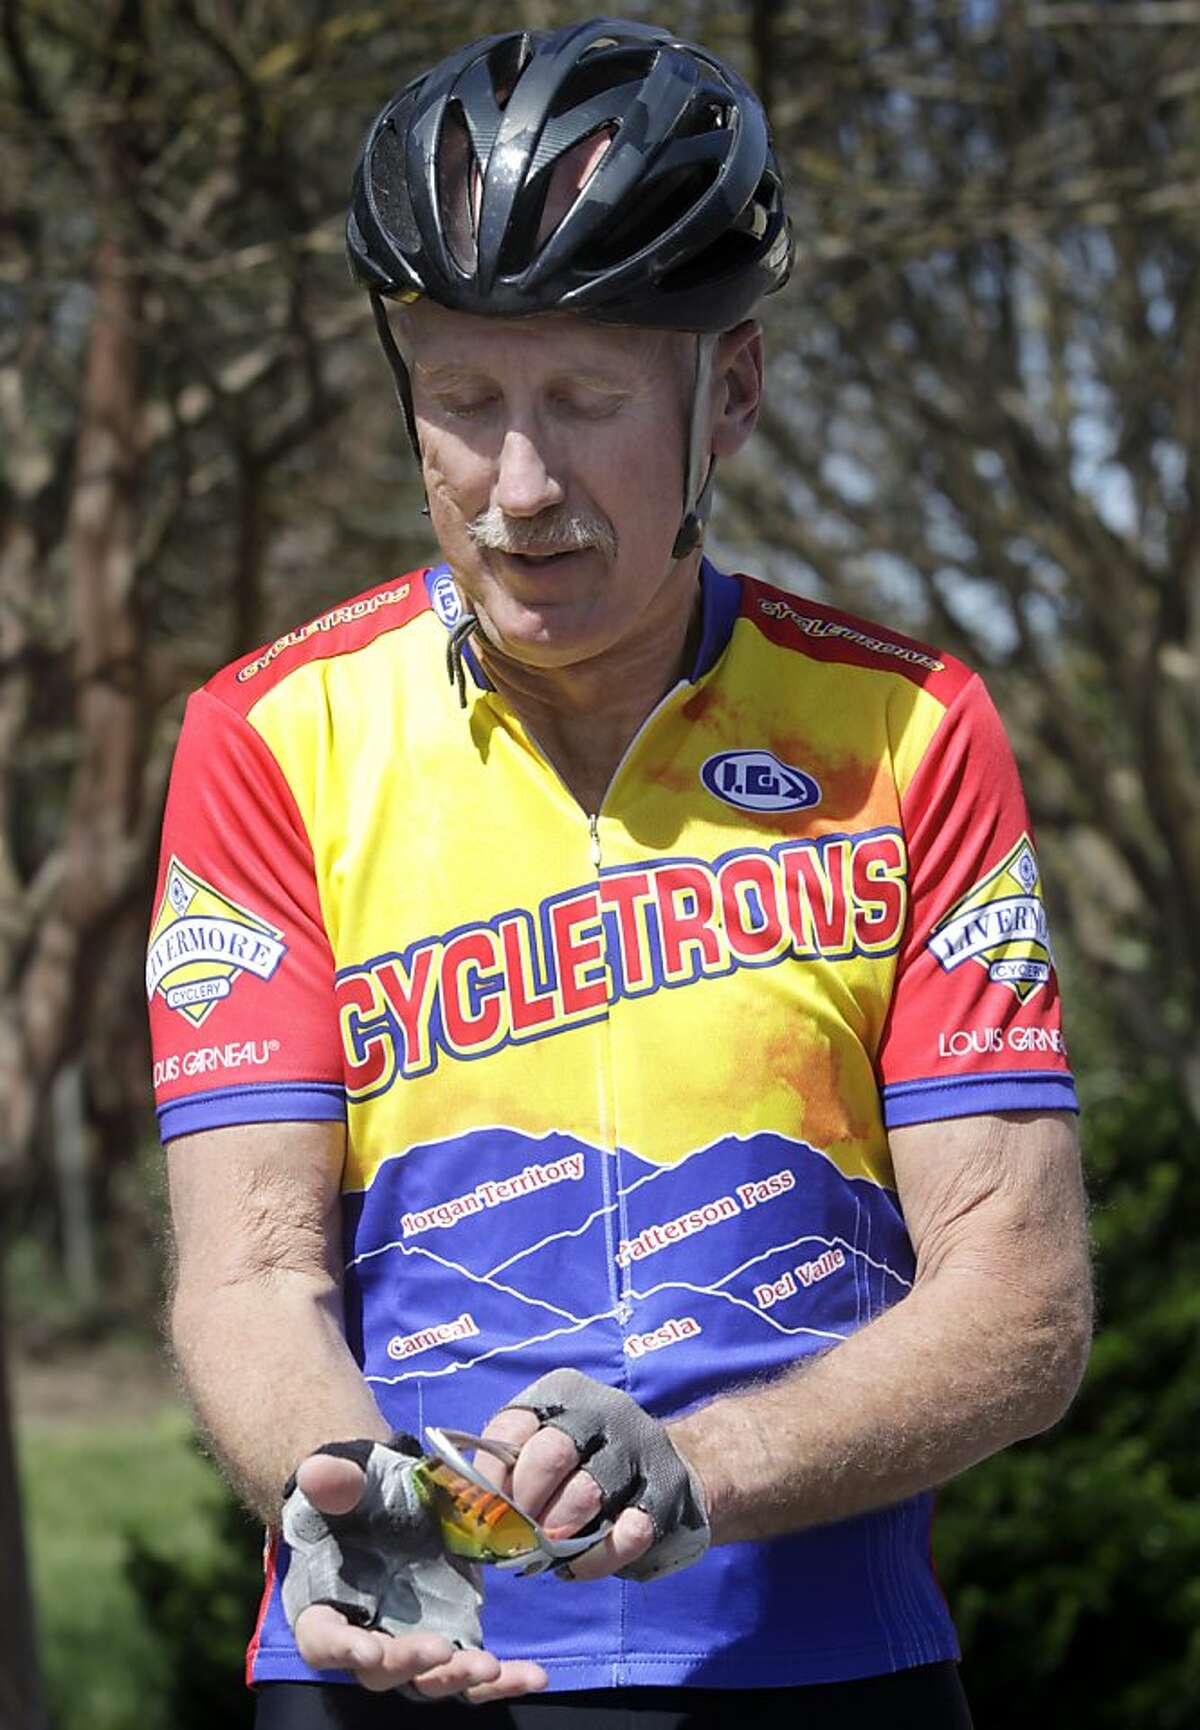 Dave Dye prepares for his daily 20-mile bike ride in French Camp, Calif. on Saturday, March 23, 2013.